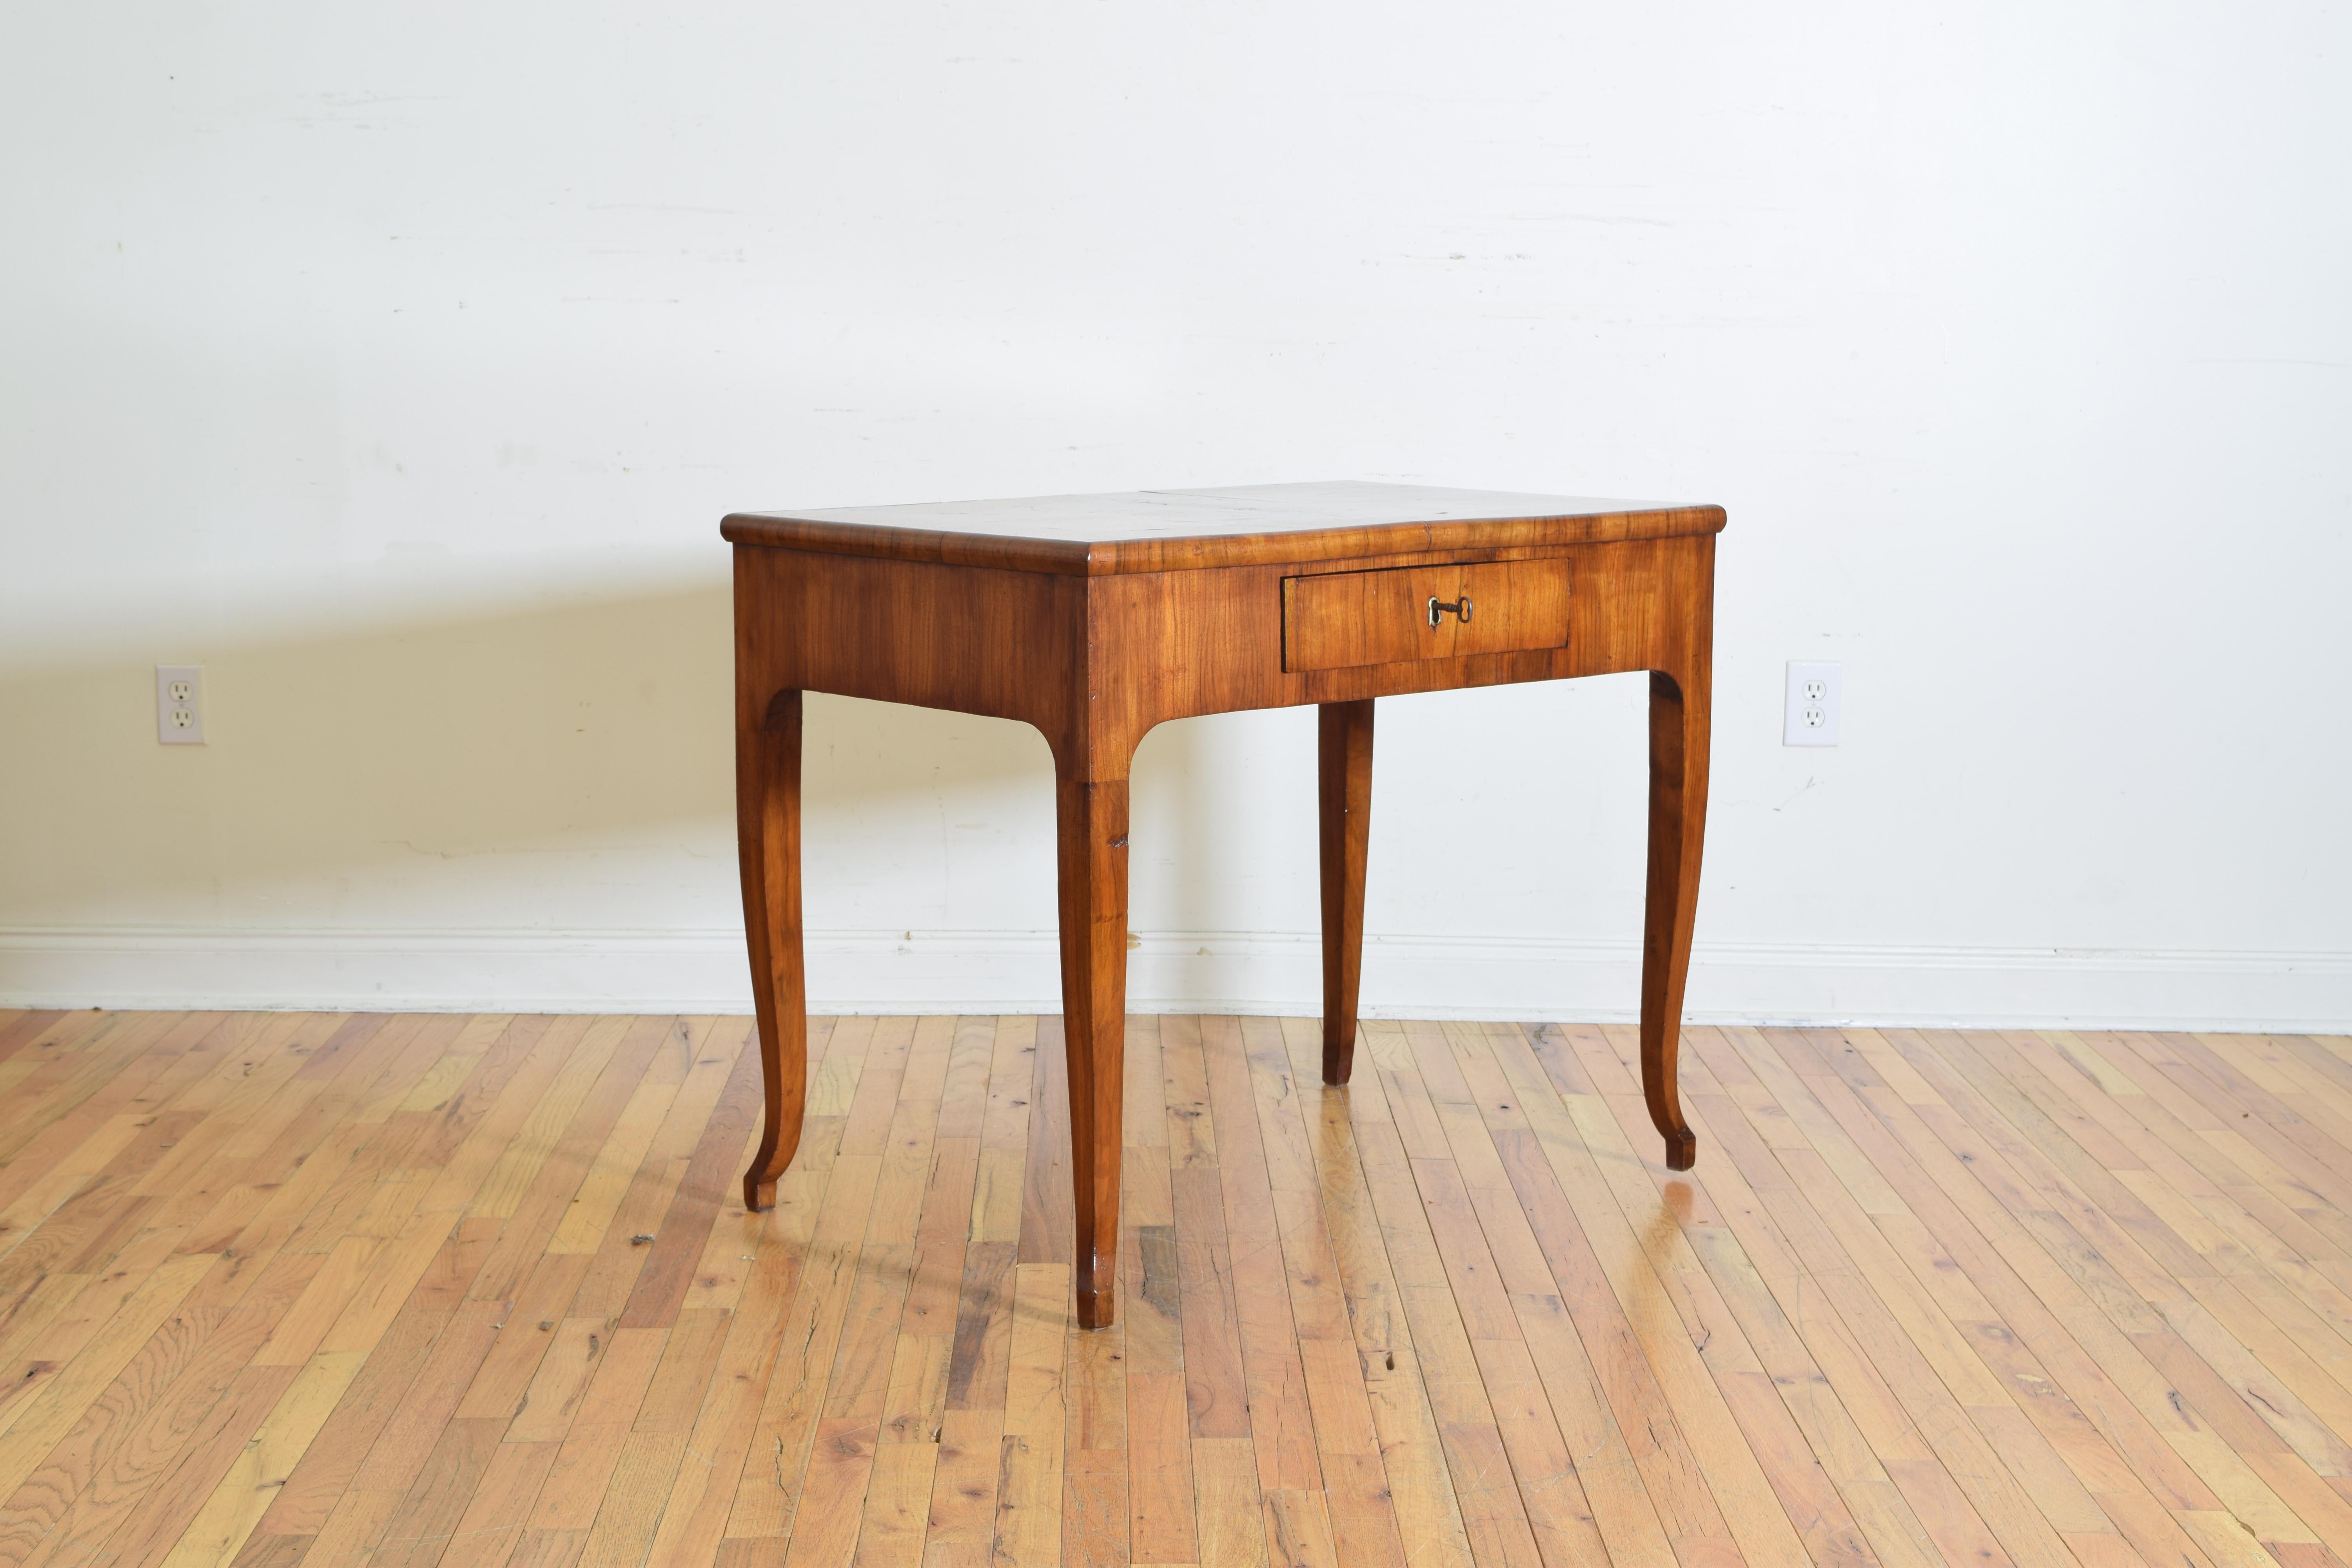 The rectangular top veneered in burl walnut and having one locking drawer, with solid walnut legs curving slightly at the feet.